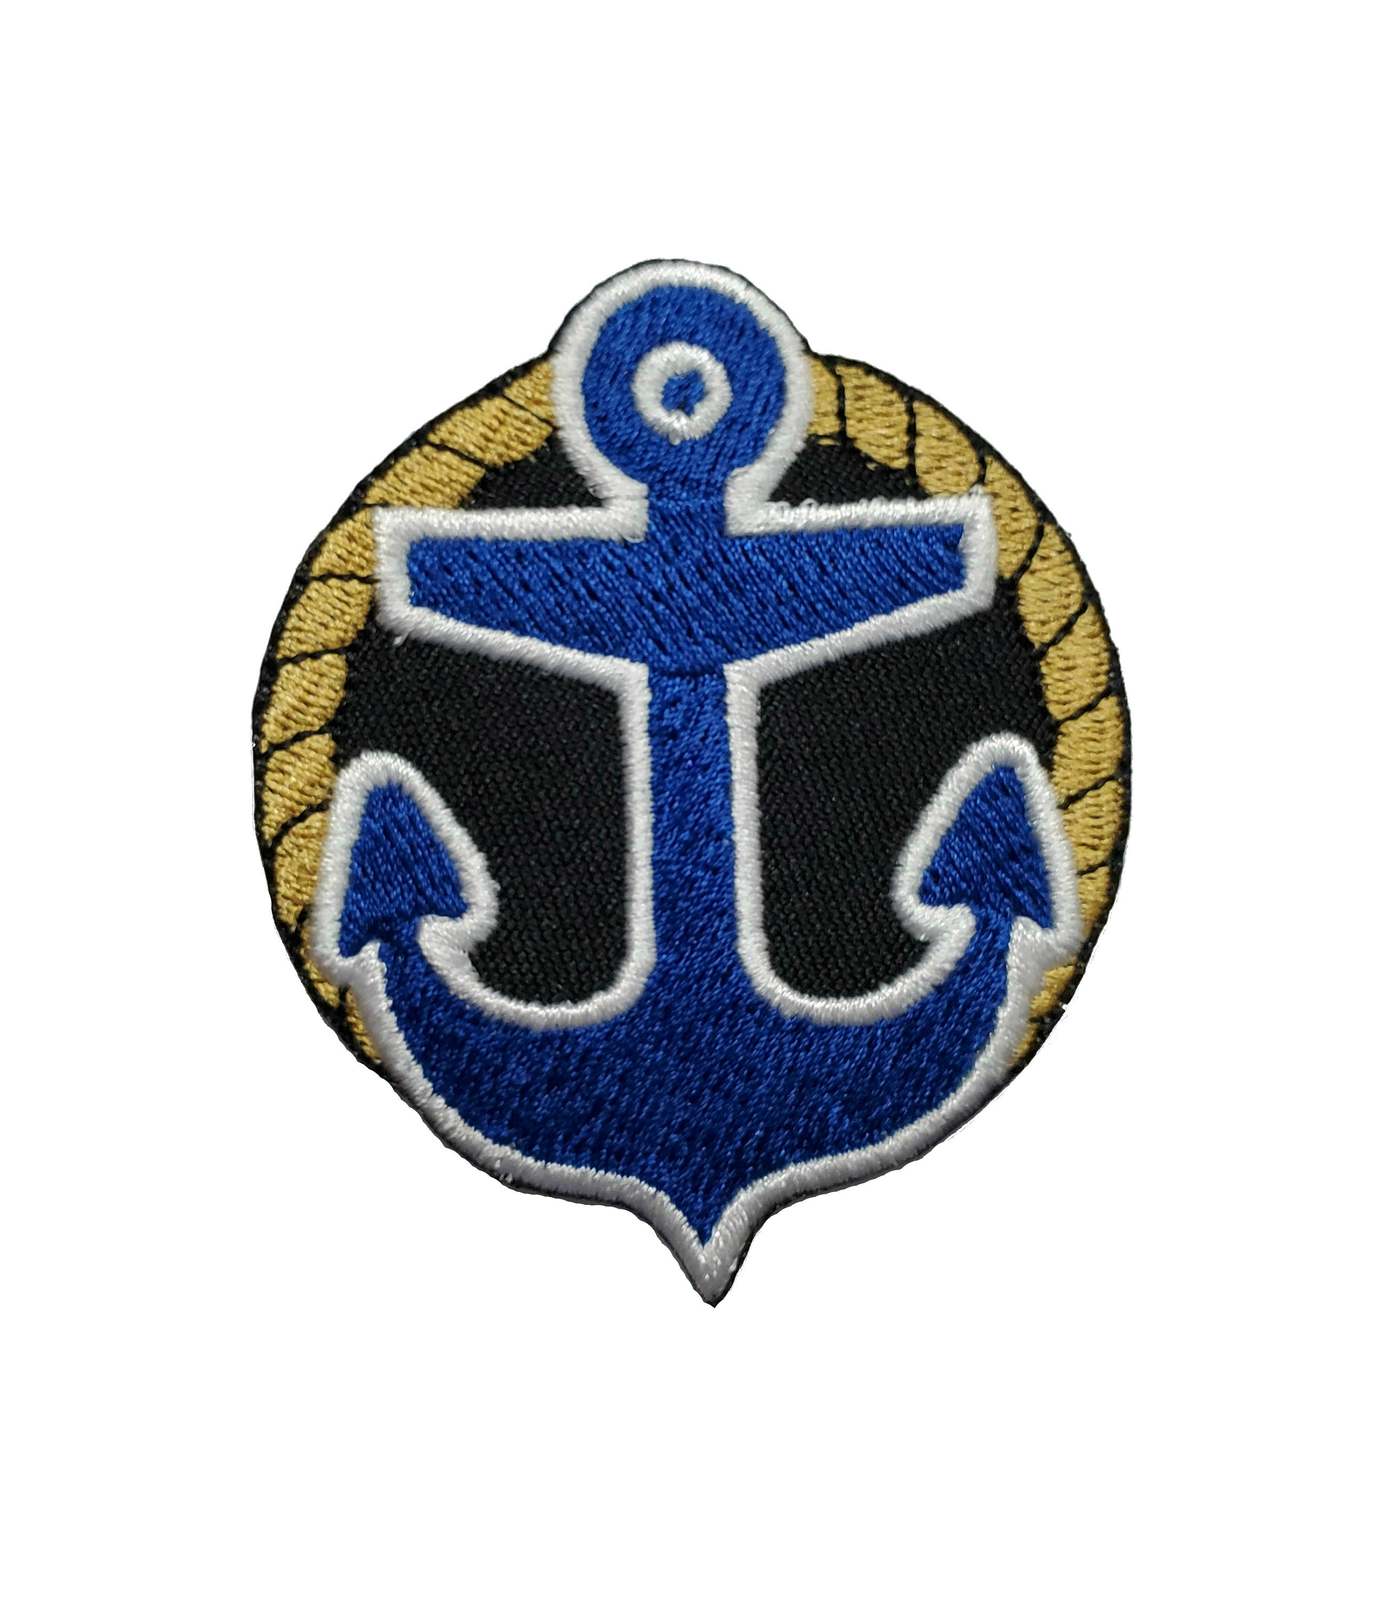 Anchor Fully Embroidered Iron-On Patch 2.4" x 2.9" Sailor Boat Navy Armed Forces - $7.87